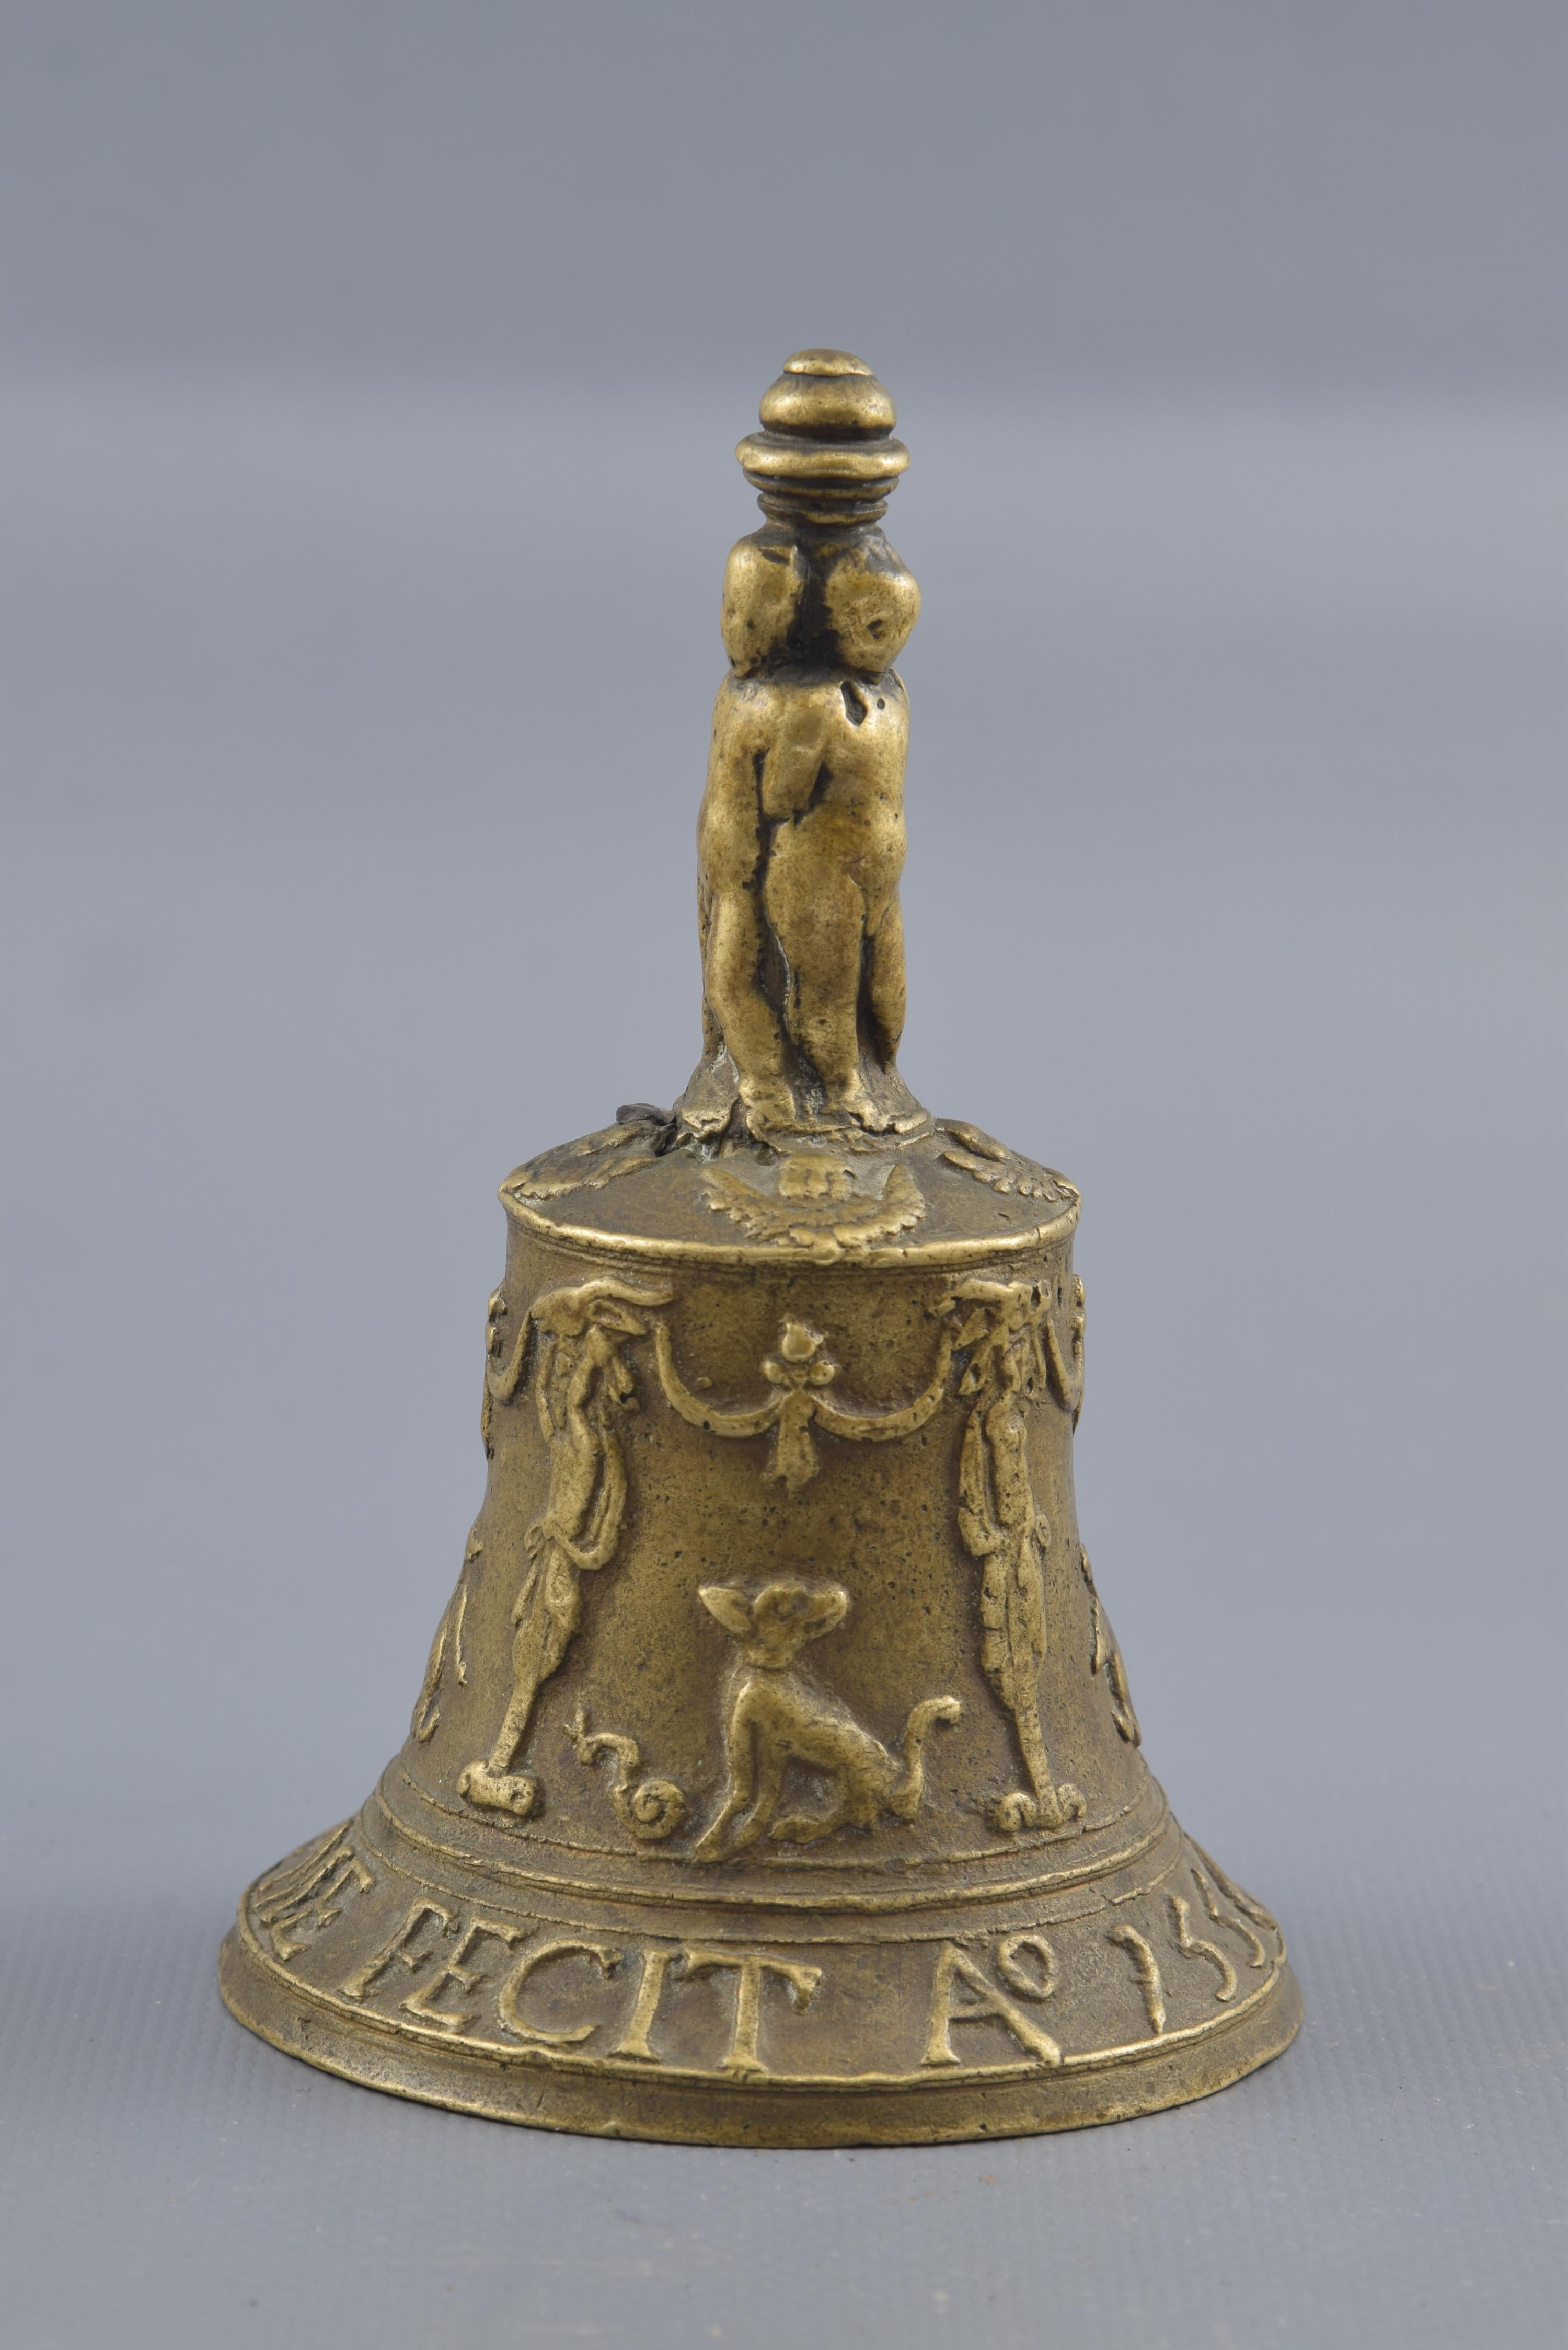 Flemish hand bell. Bronze. Morel, 1556.
Bell with clapper made of bronze that presents a decoration in relief to the outside (figures on the handle, heads of winged angels, on the body, a figurative composition under bow garlands accompanied by